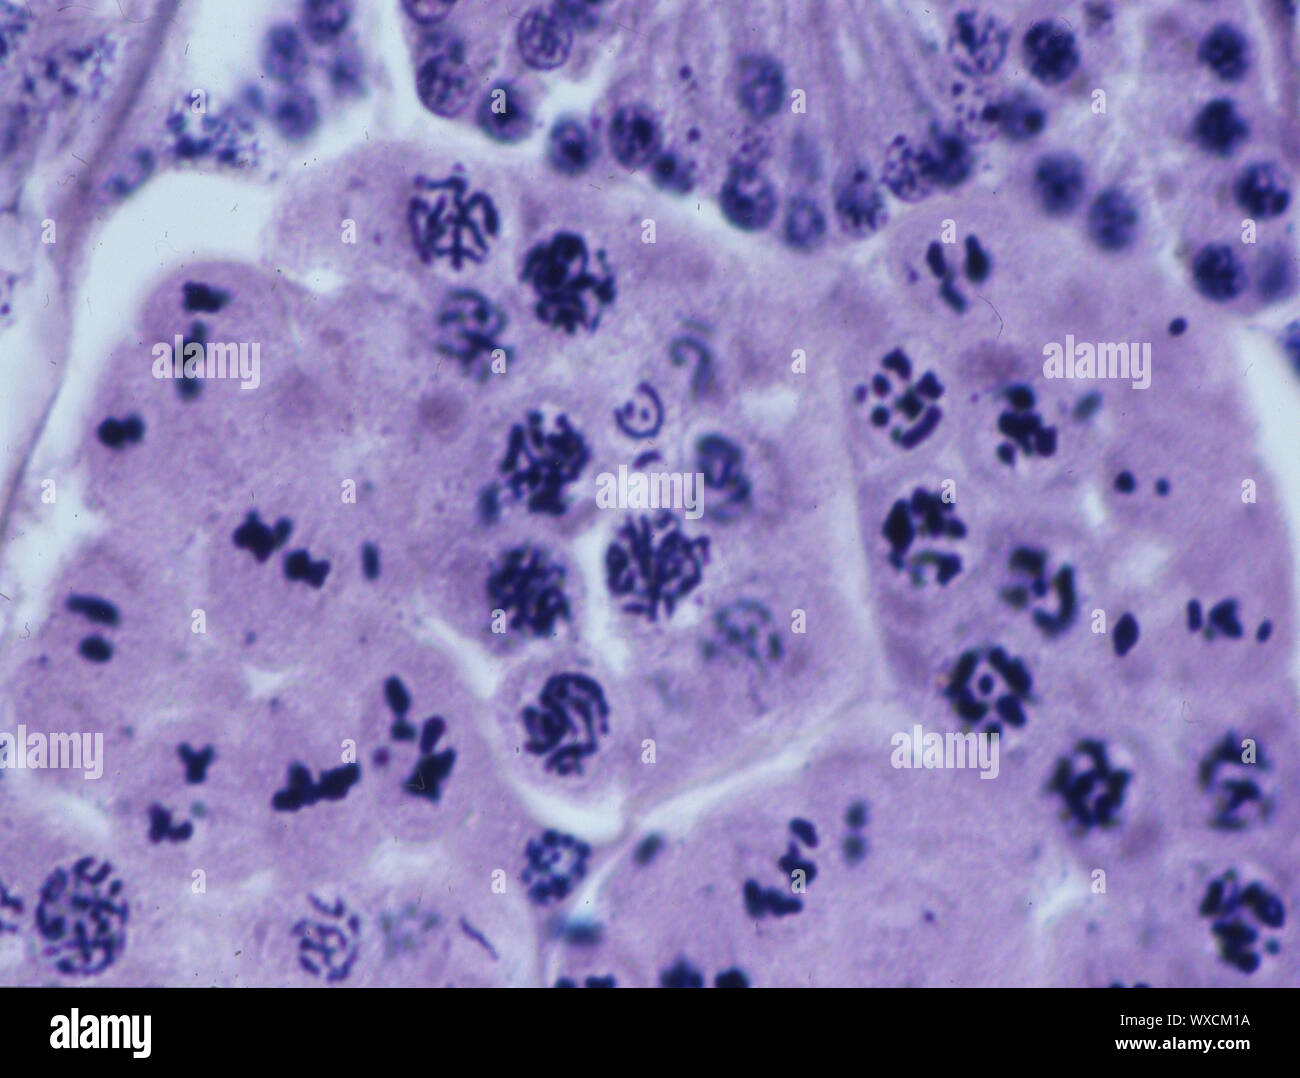 Mitosis in body cells under the microscope 100x Stock Photo - Alamy